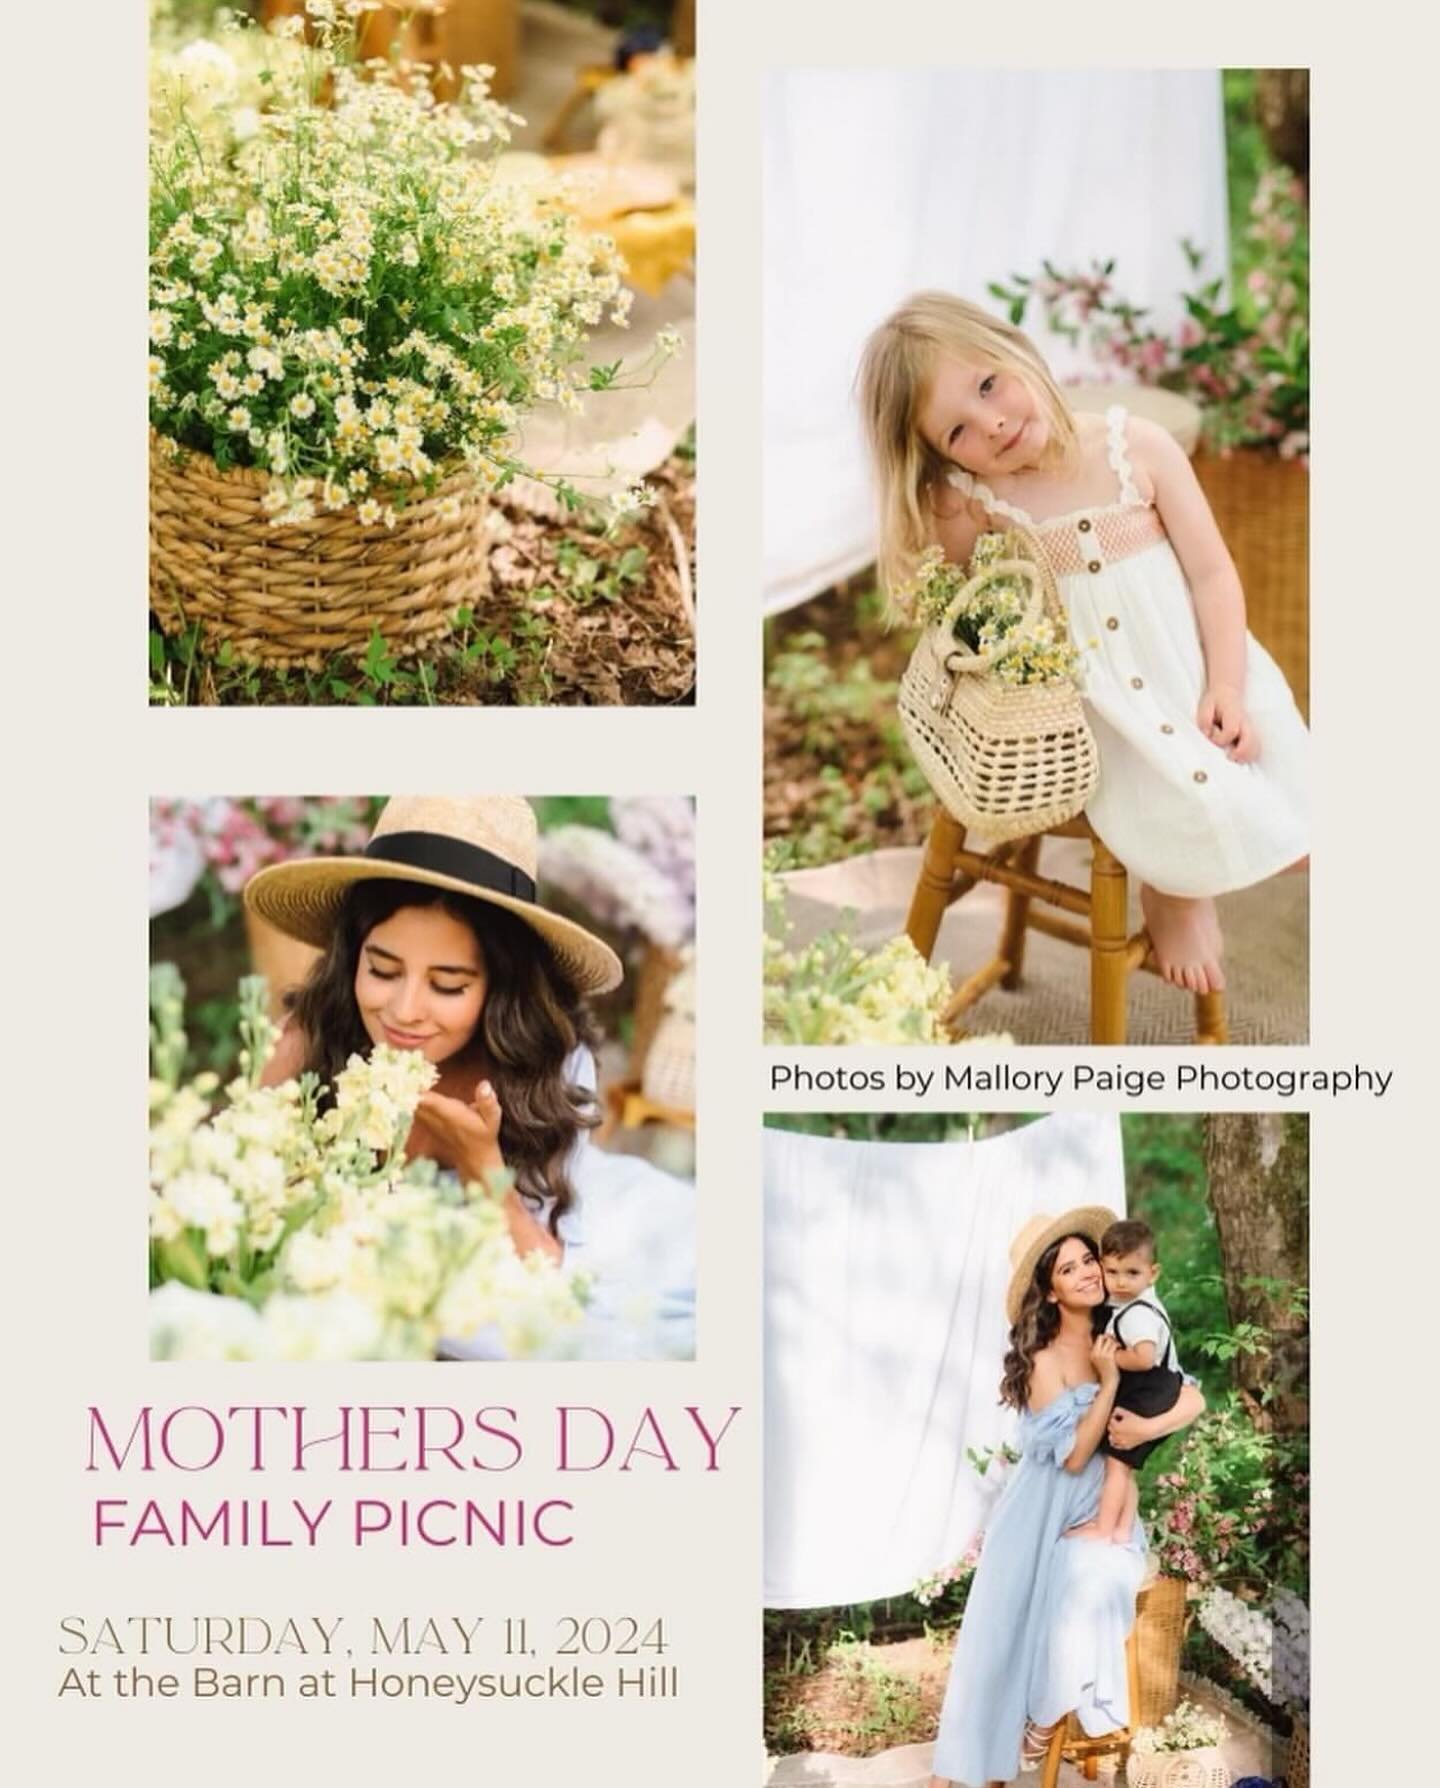 Join us for a Mother&rsquo;s Day Family Picnic at @honeysucklehillevents!

A family fun filled afternoon to spend quality time together and celebrate those important women in our lives.

Vendors Include:
🍴BBQ from @bensbackdraftbbq1
🍦Ice cream from